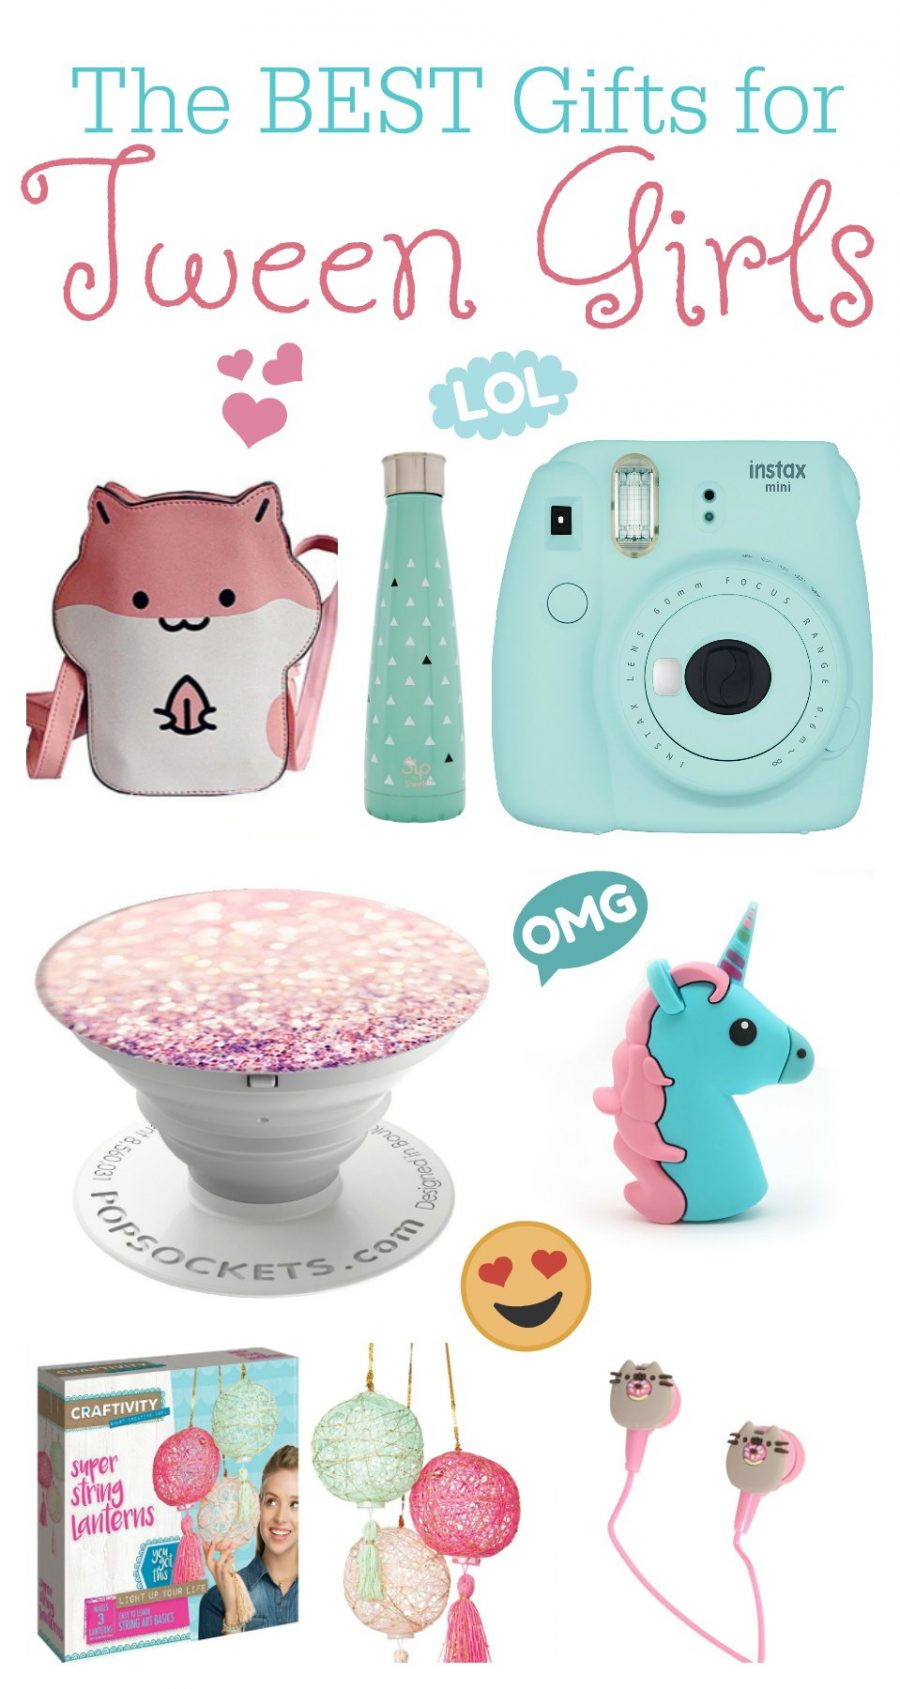 Great Gift Ideas For Girls
 The BEST Gift Ideas for Tween Girls